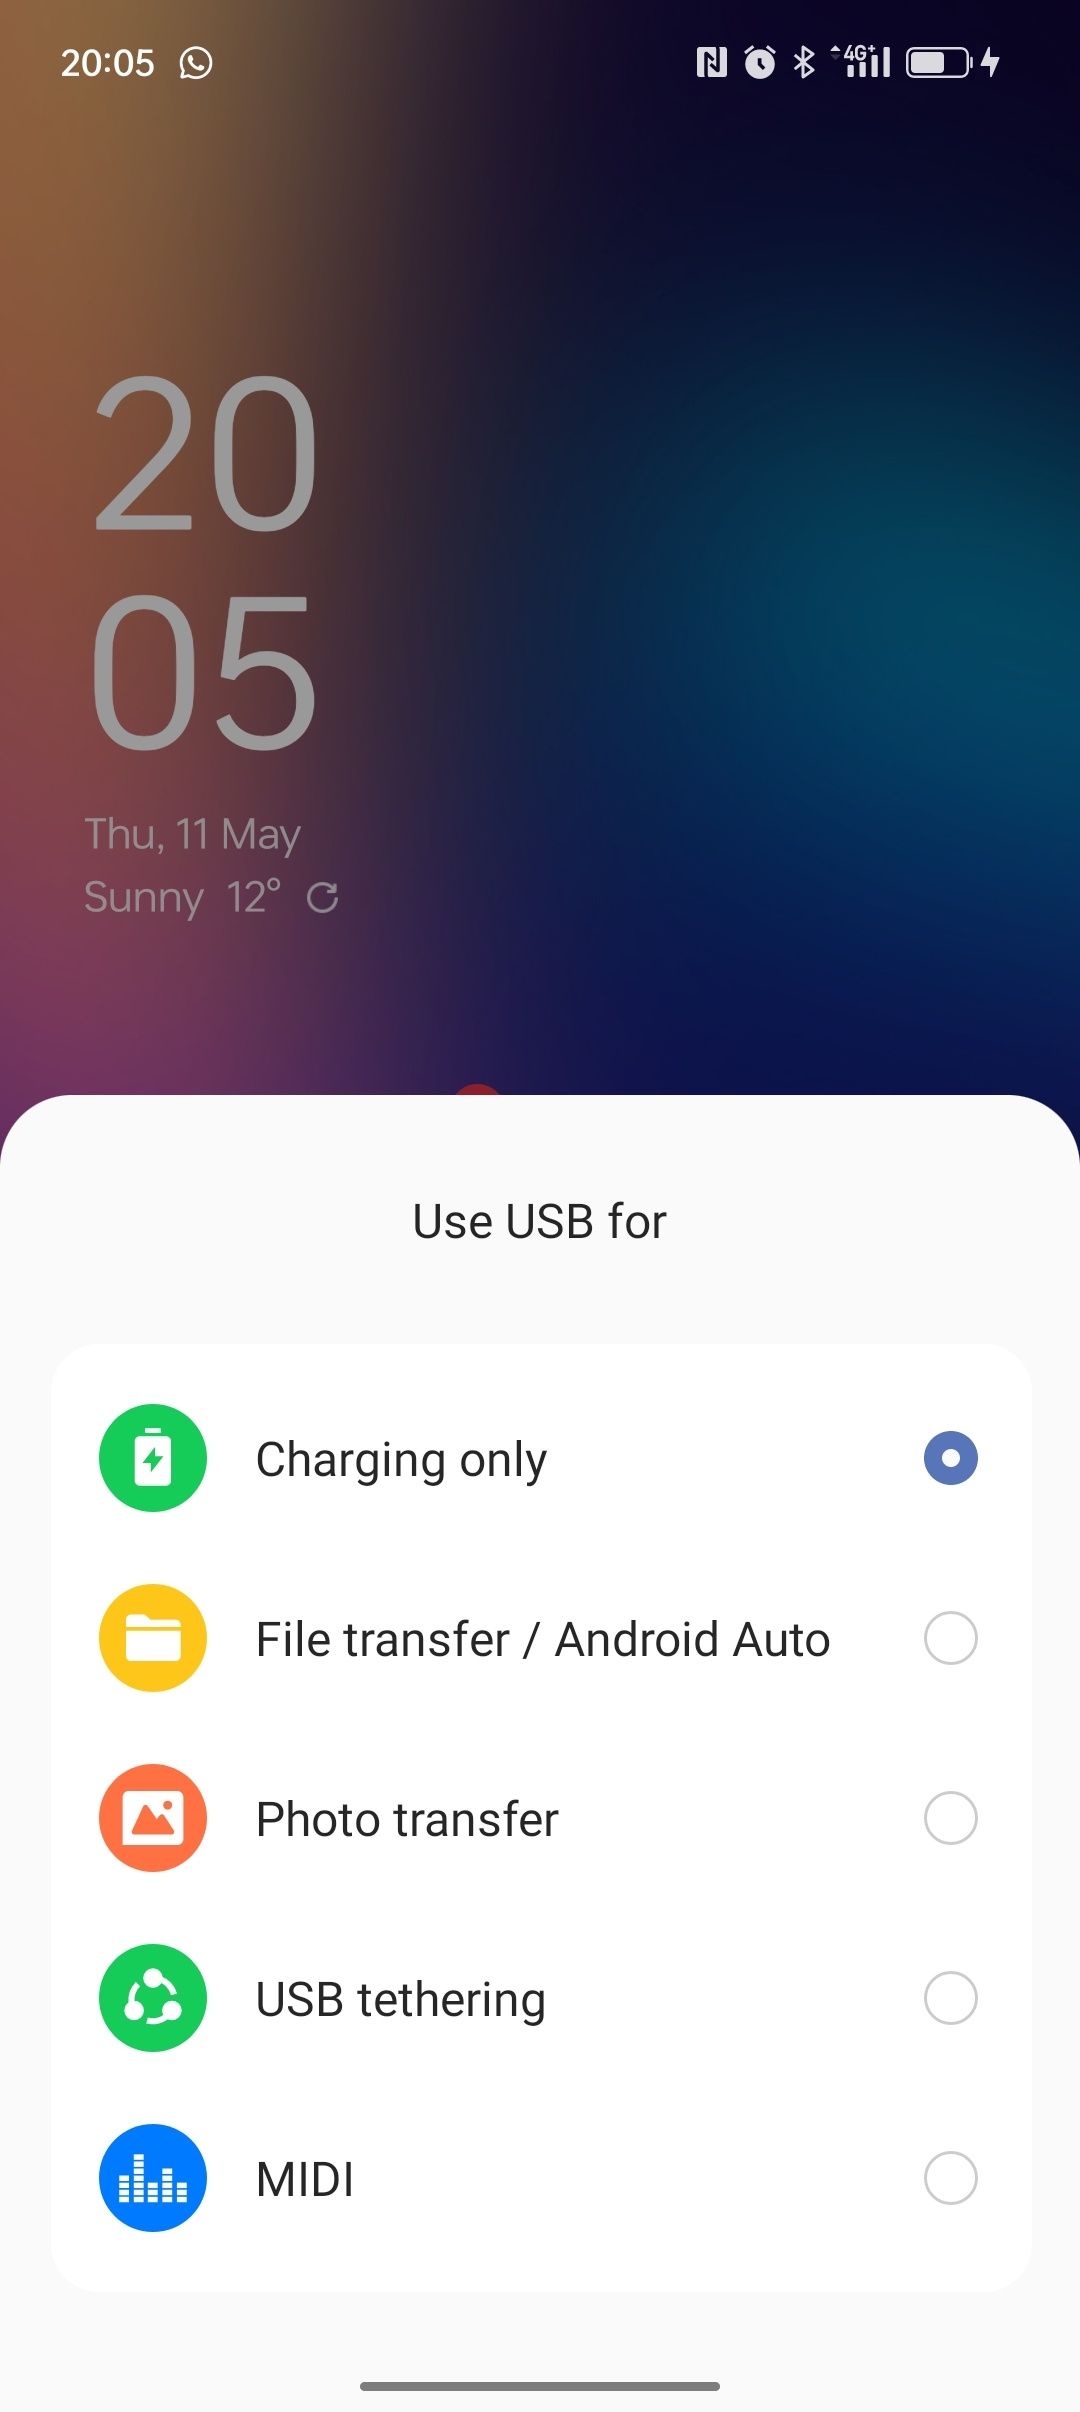 Enable USB tethering on Android